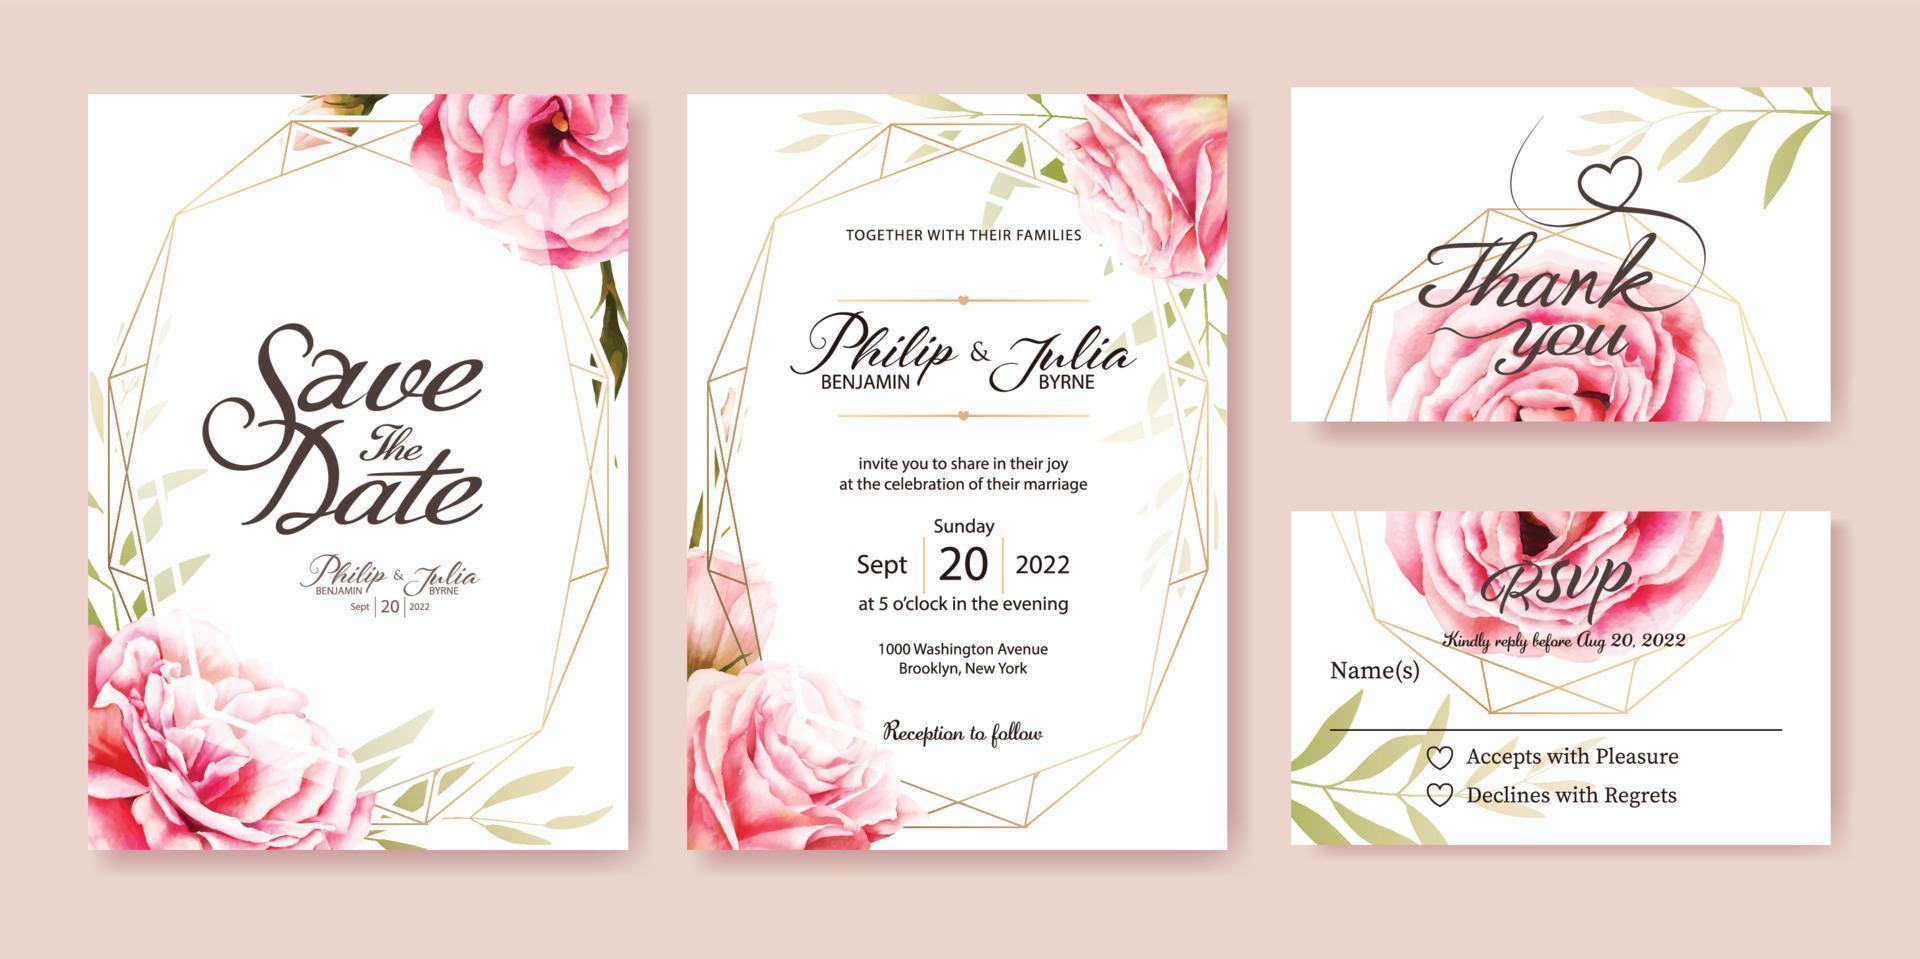 Wedding Invitation, save the date, thank you, rsvp card Design template. Vector. Pink rose, olive leaves. Watercolor style vector